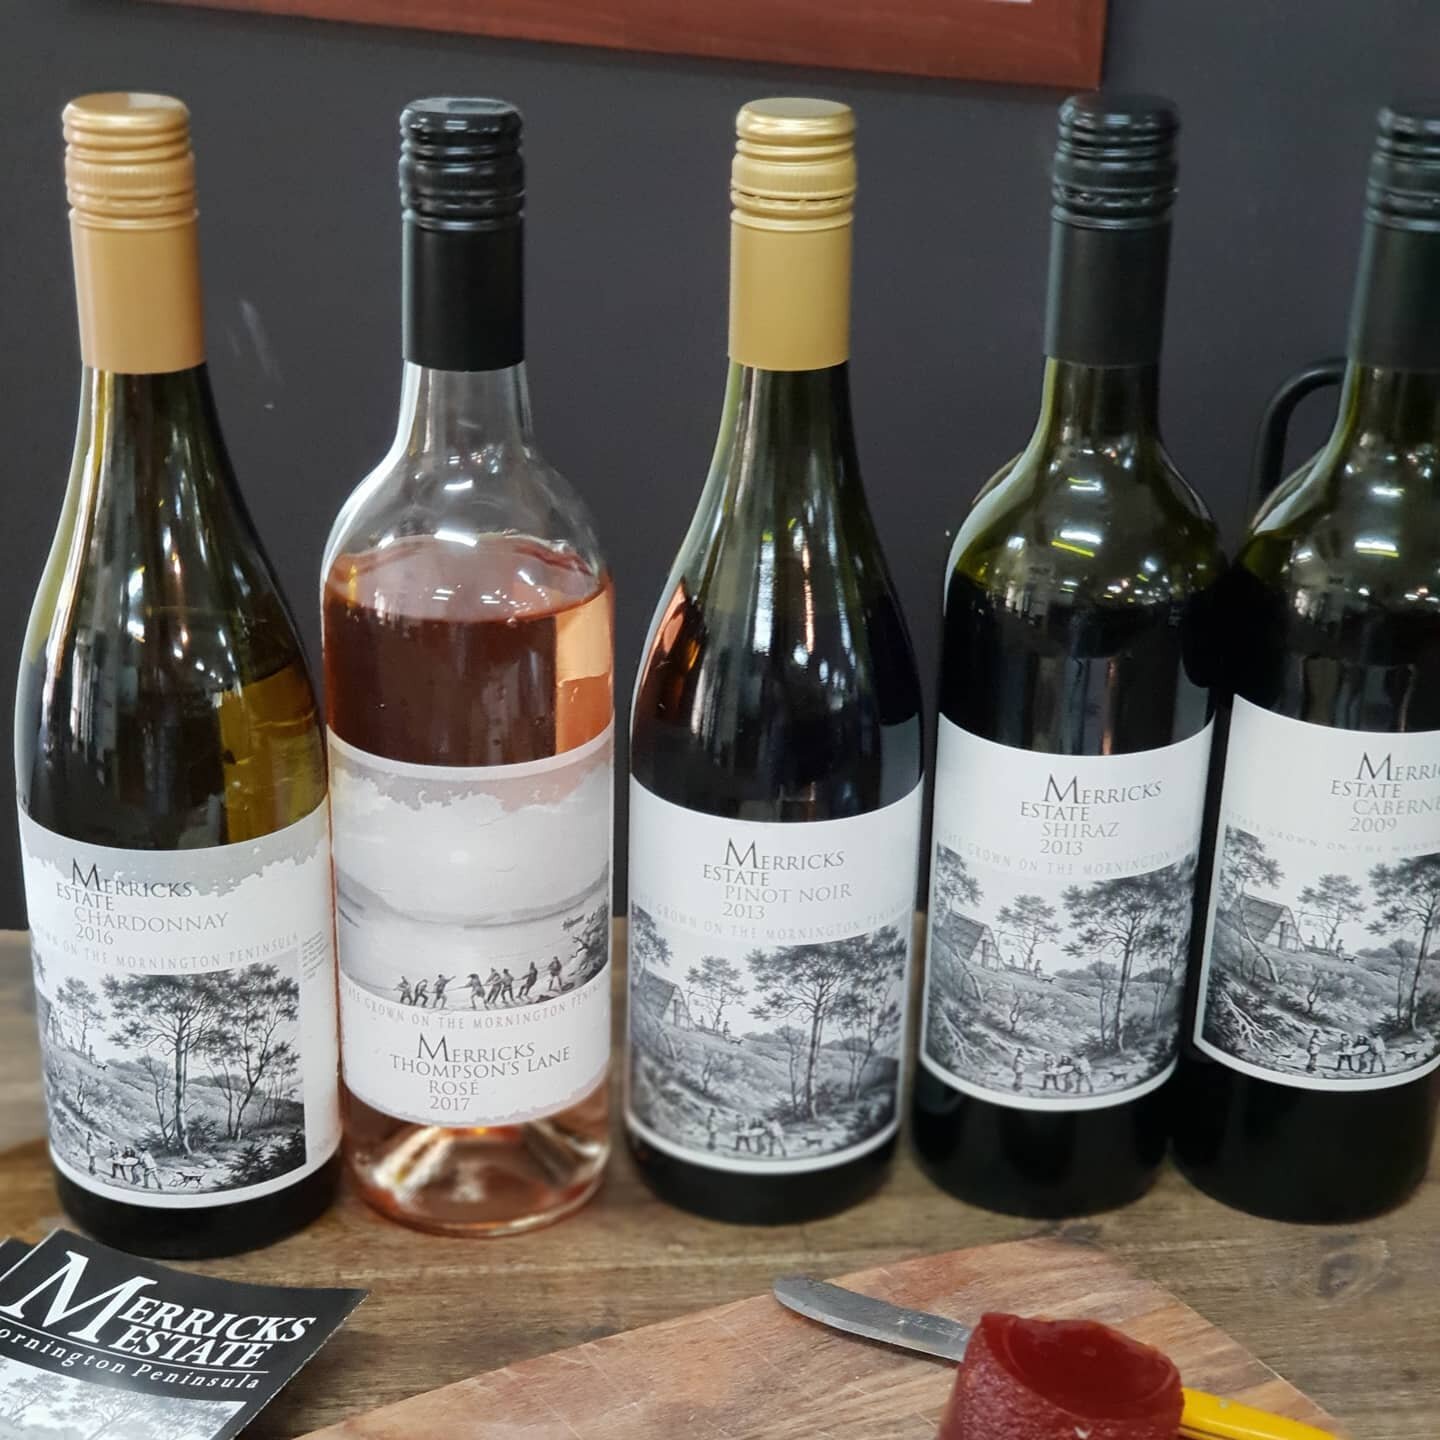 Order online with free delivery at www.merricksestate.com.au 
Like all Australian we are responding to the Corvid-19 crisis by closing our cellar door tastings and sales until further notice. However, we can arrange delivery of our current Merricks E